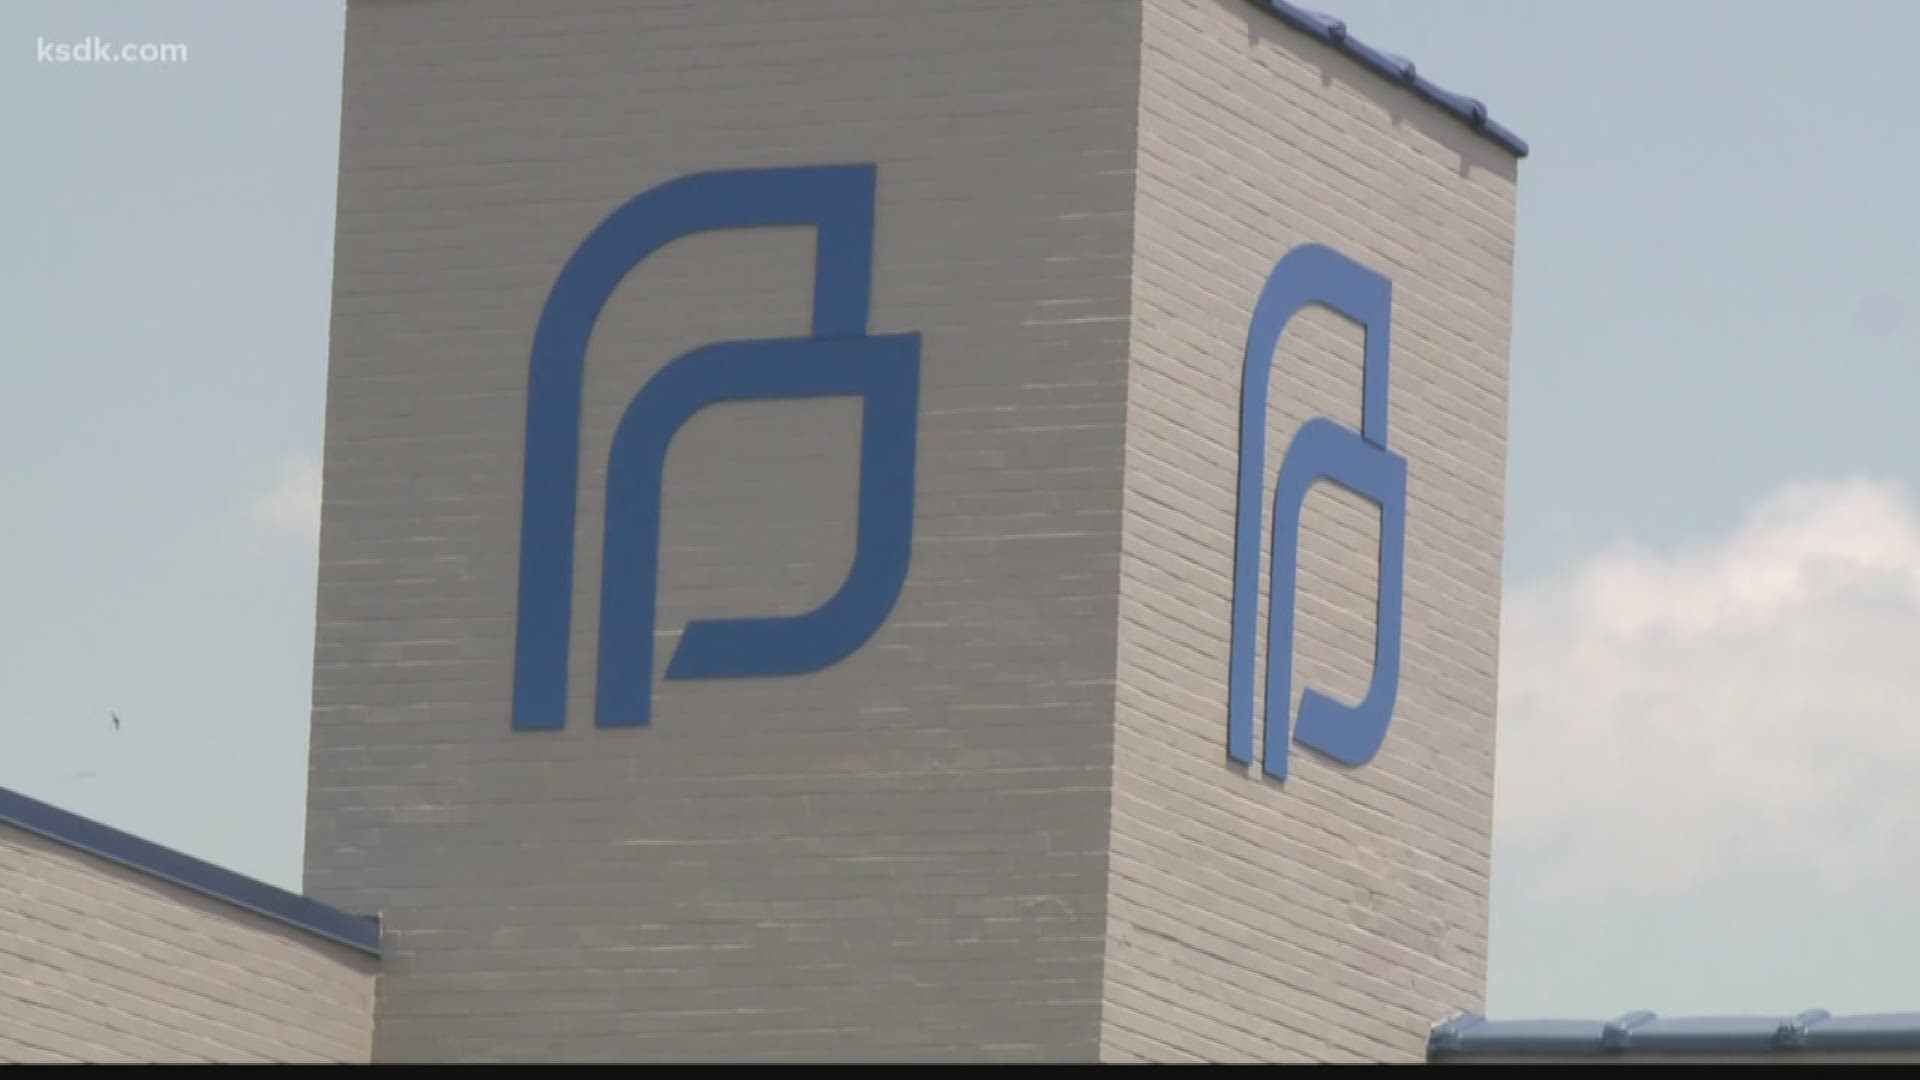 Planned Parenthood's license is due to expire on Friday.